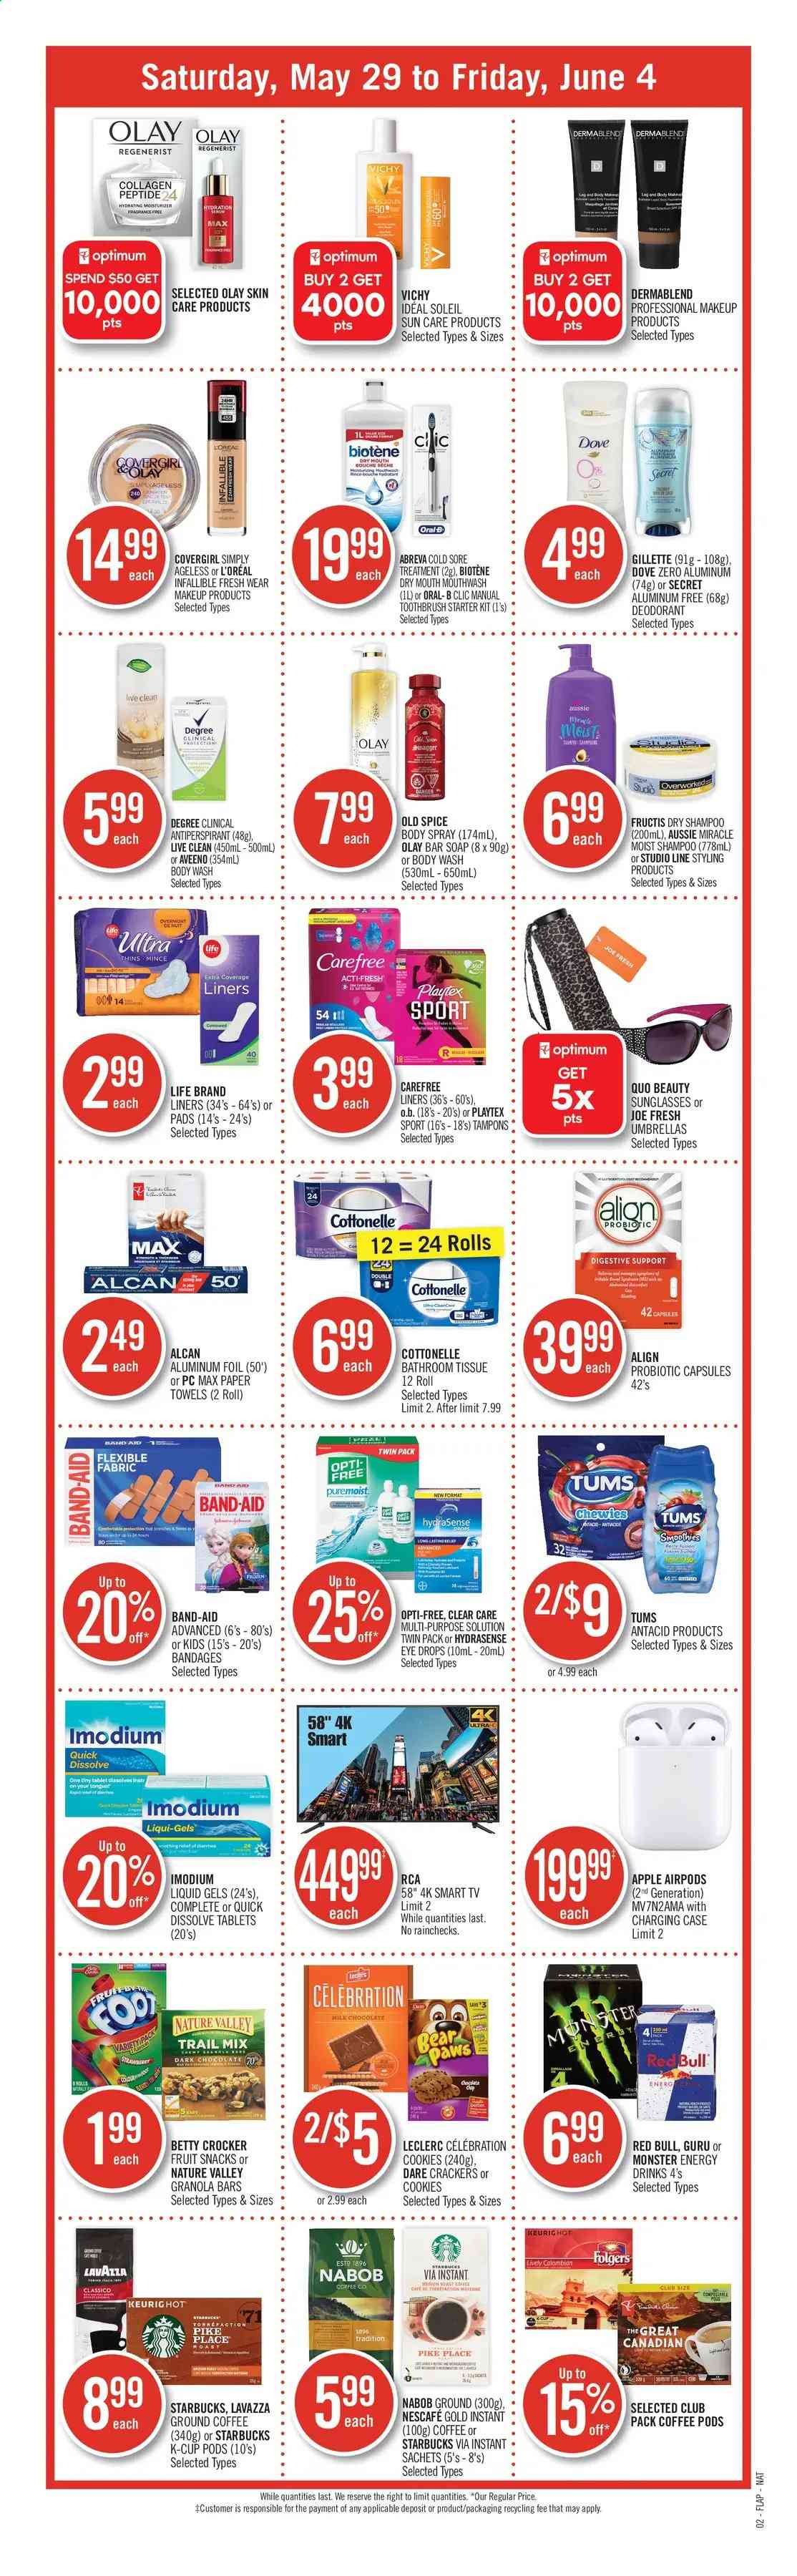 thumbnail - Shoppers Drug Mart Flyer - May 29, 2021 - June 04, 2021 - Sales products - cookies, milk chocolate, chocolate, Celebration, crackers, dark chocolate, Digestive, fruit snack, Thins, granola bar, Nature Valley, spice, Classico, trail mix, energy drink, Monster, Red Bull, Monster Energy, smoothie, coffee pods, Folgers, ground coffee, coffee capsules, Starbucks, K-Cups, Lavazza, Aveeno, bath tissue, Cottonelle, kitchen towels, paper towels, body wash, Vichy, soap bar, soap, Biotene, toothbrush, mouthwash, Playtex, Carefree, tampons, Abreva, L’Oréal, moisturizer, Olay, Aussie, Fructis, body spray, anti-perspirant, makeup, sunglasses, Clear Care, eye drops, Antacid, Gillette, shampoo, Old Spice, Oral-B, Nescafé, deodorant. Page 15.